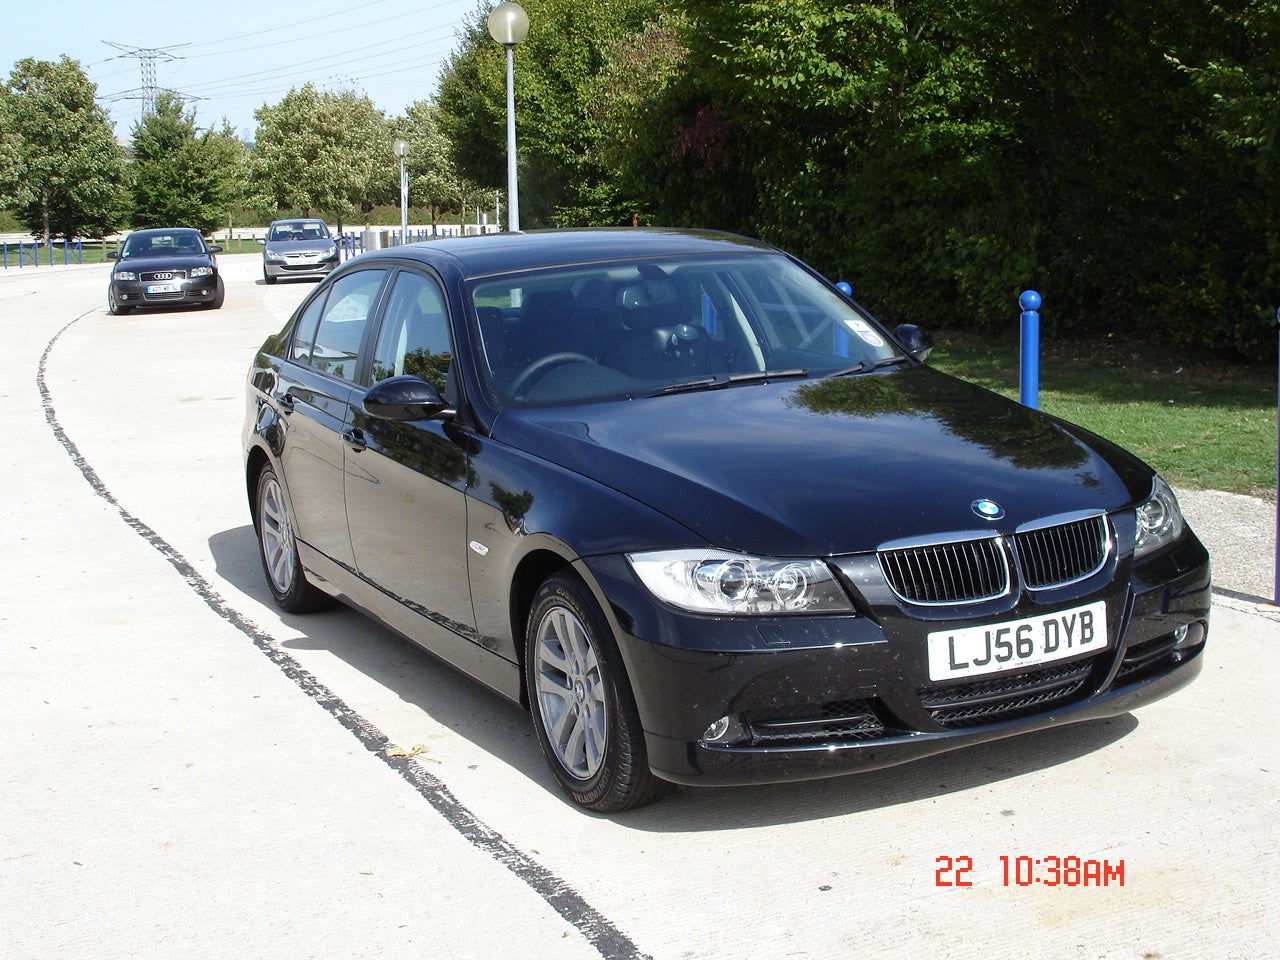 Series 2006 on 2006 Bmw 3 Series 320d   Pictures   2006 Bmw 320 320d Picture